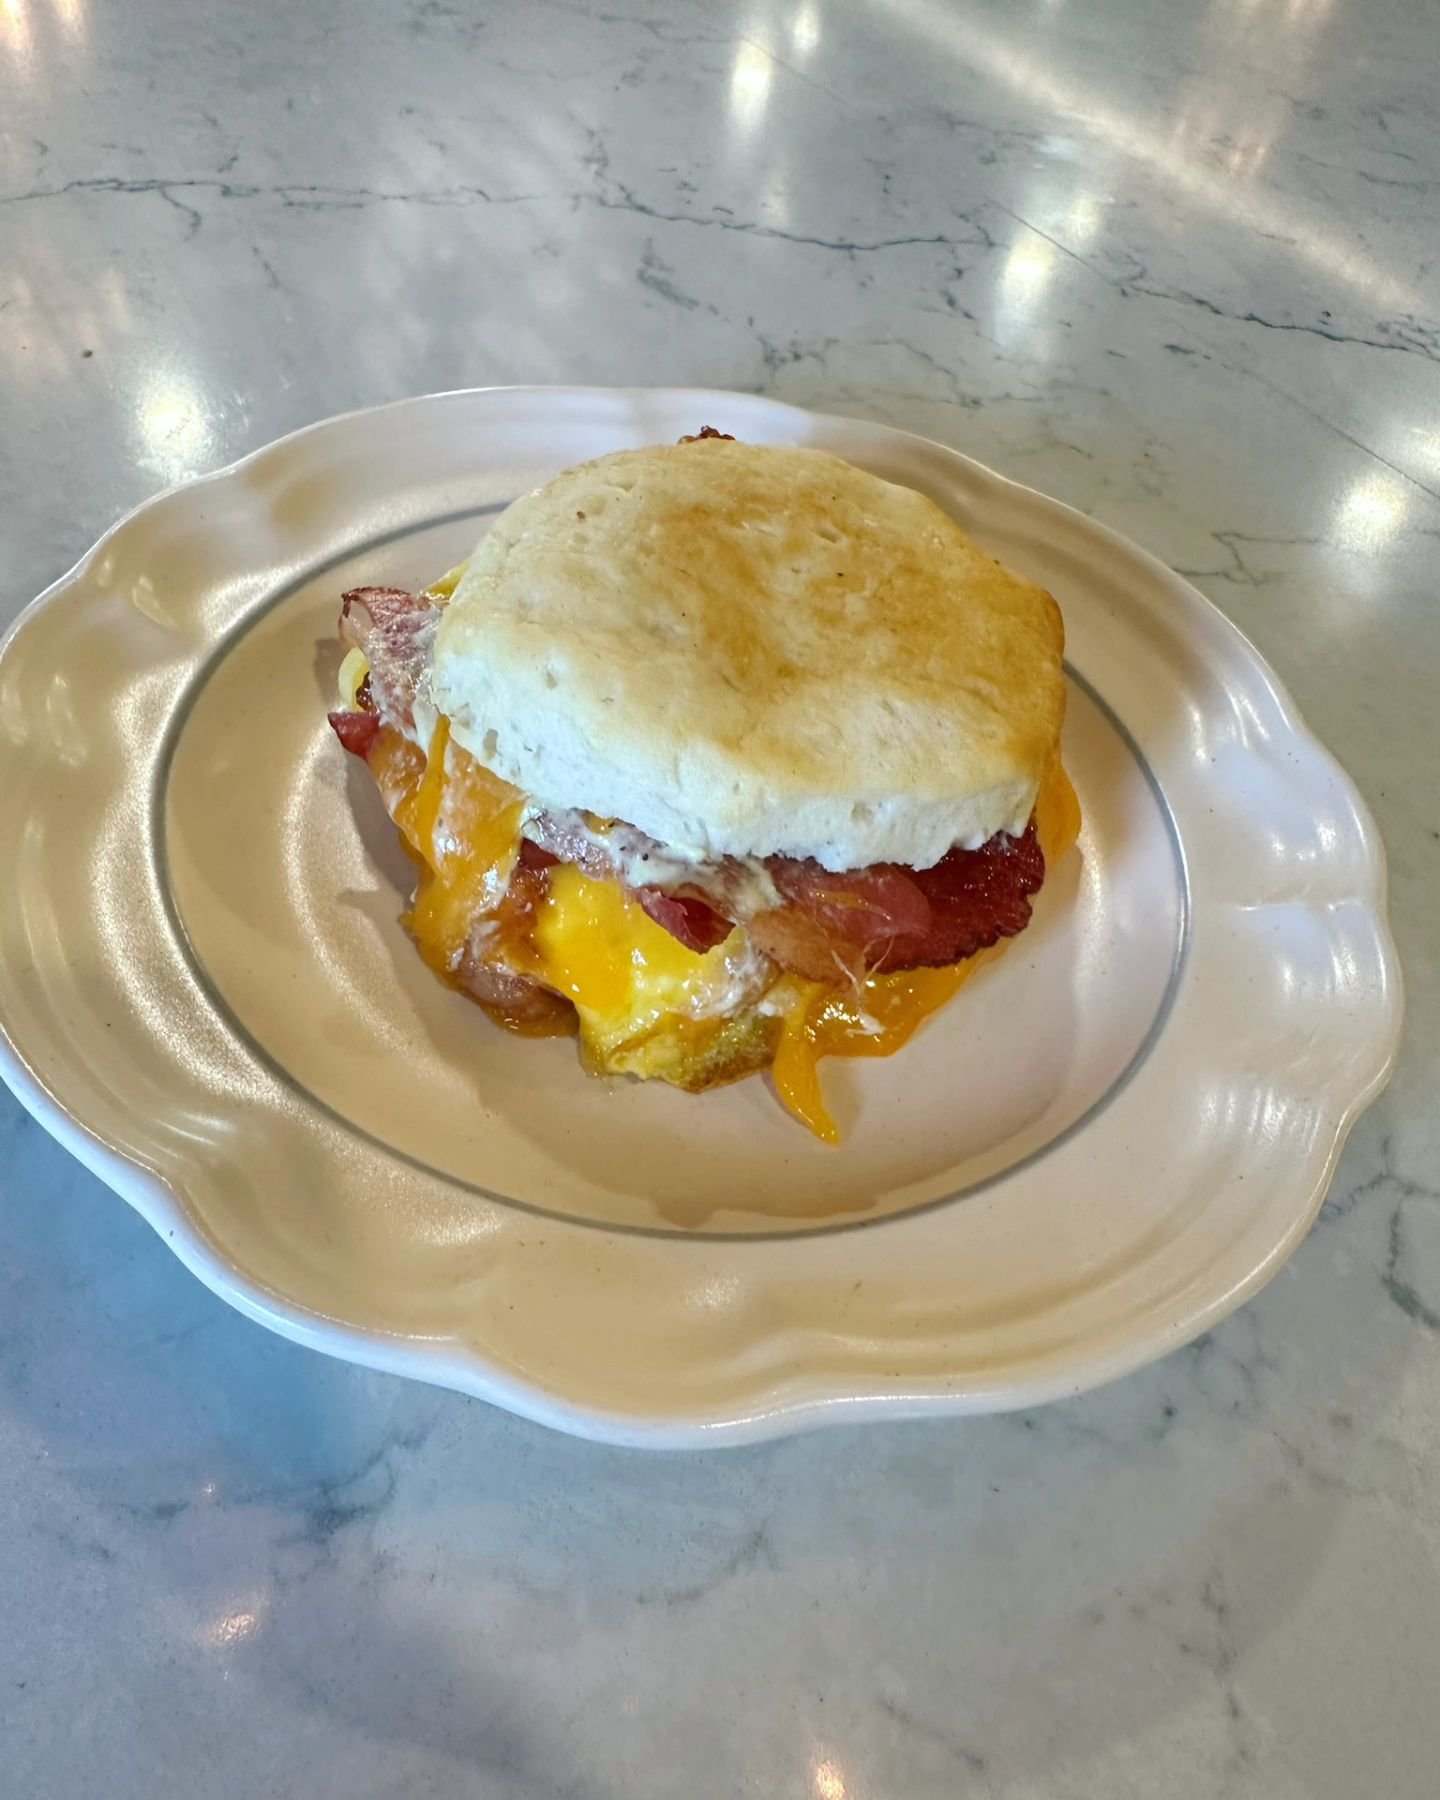 the..
bacon,egg &amp; cheese biscuit sandwich 🤤
simple. cheap. quick.
heck on being a specialty cheesecake shop....
we got poptarts &amp; biscuits baby! 😂😂

come and get it! 
6-6 tomorrow &amp; Friday 

618-491-0901 
www.steelcitycheesecakes.com 
